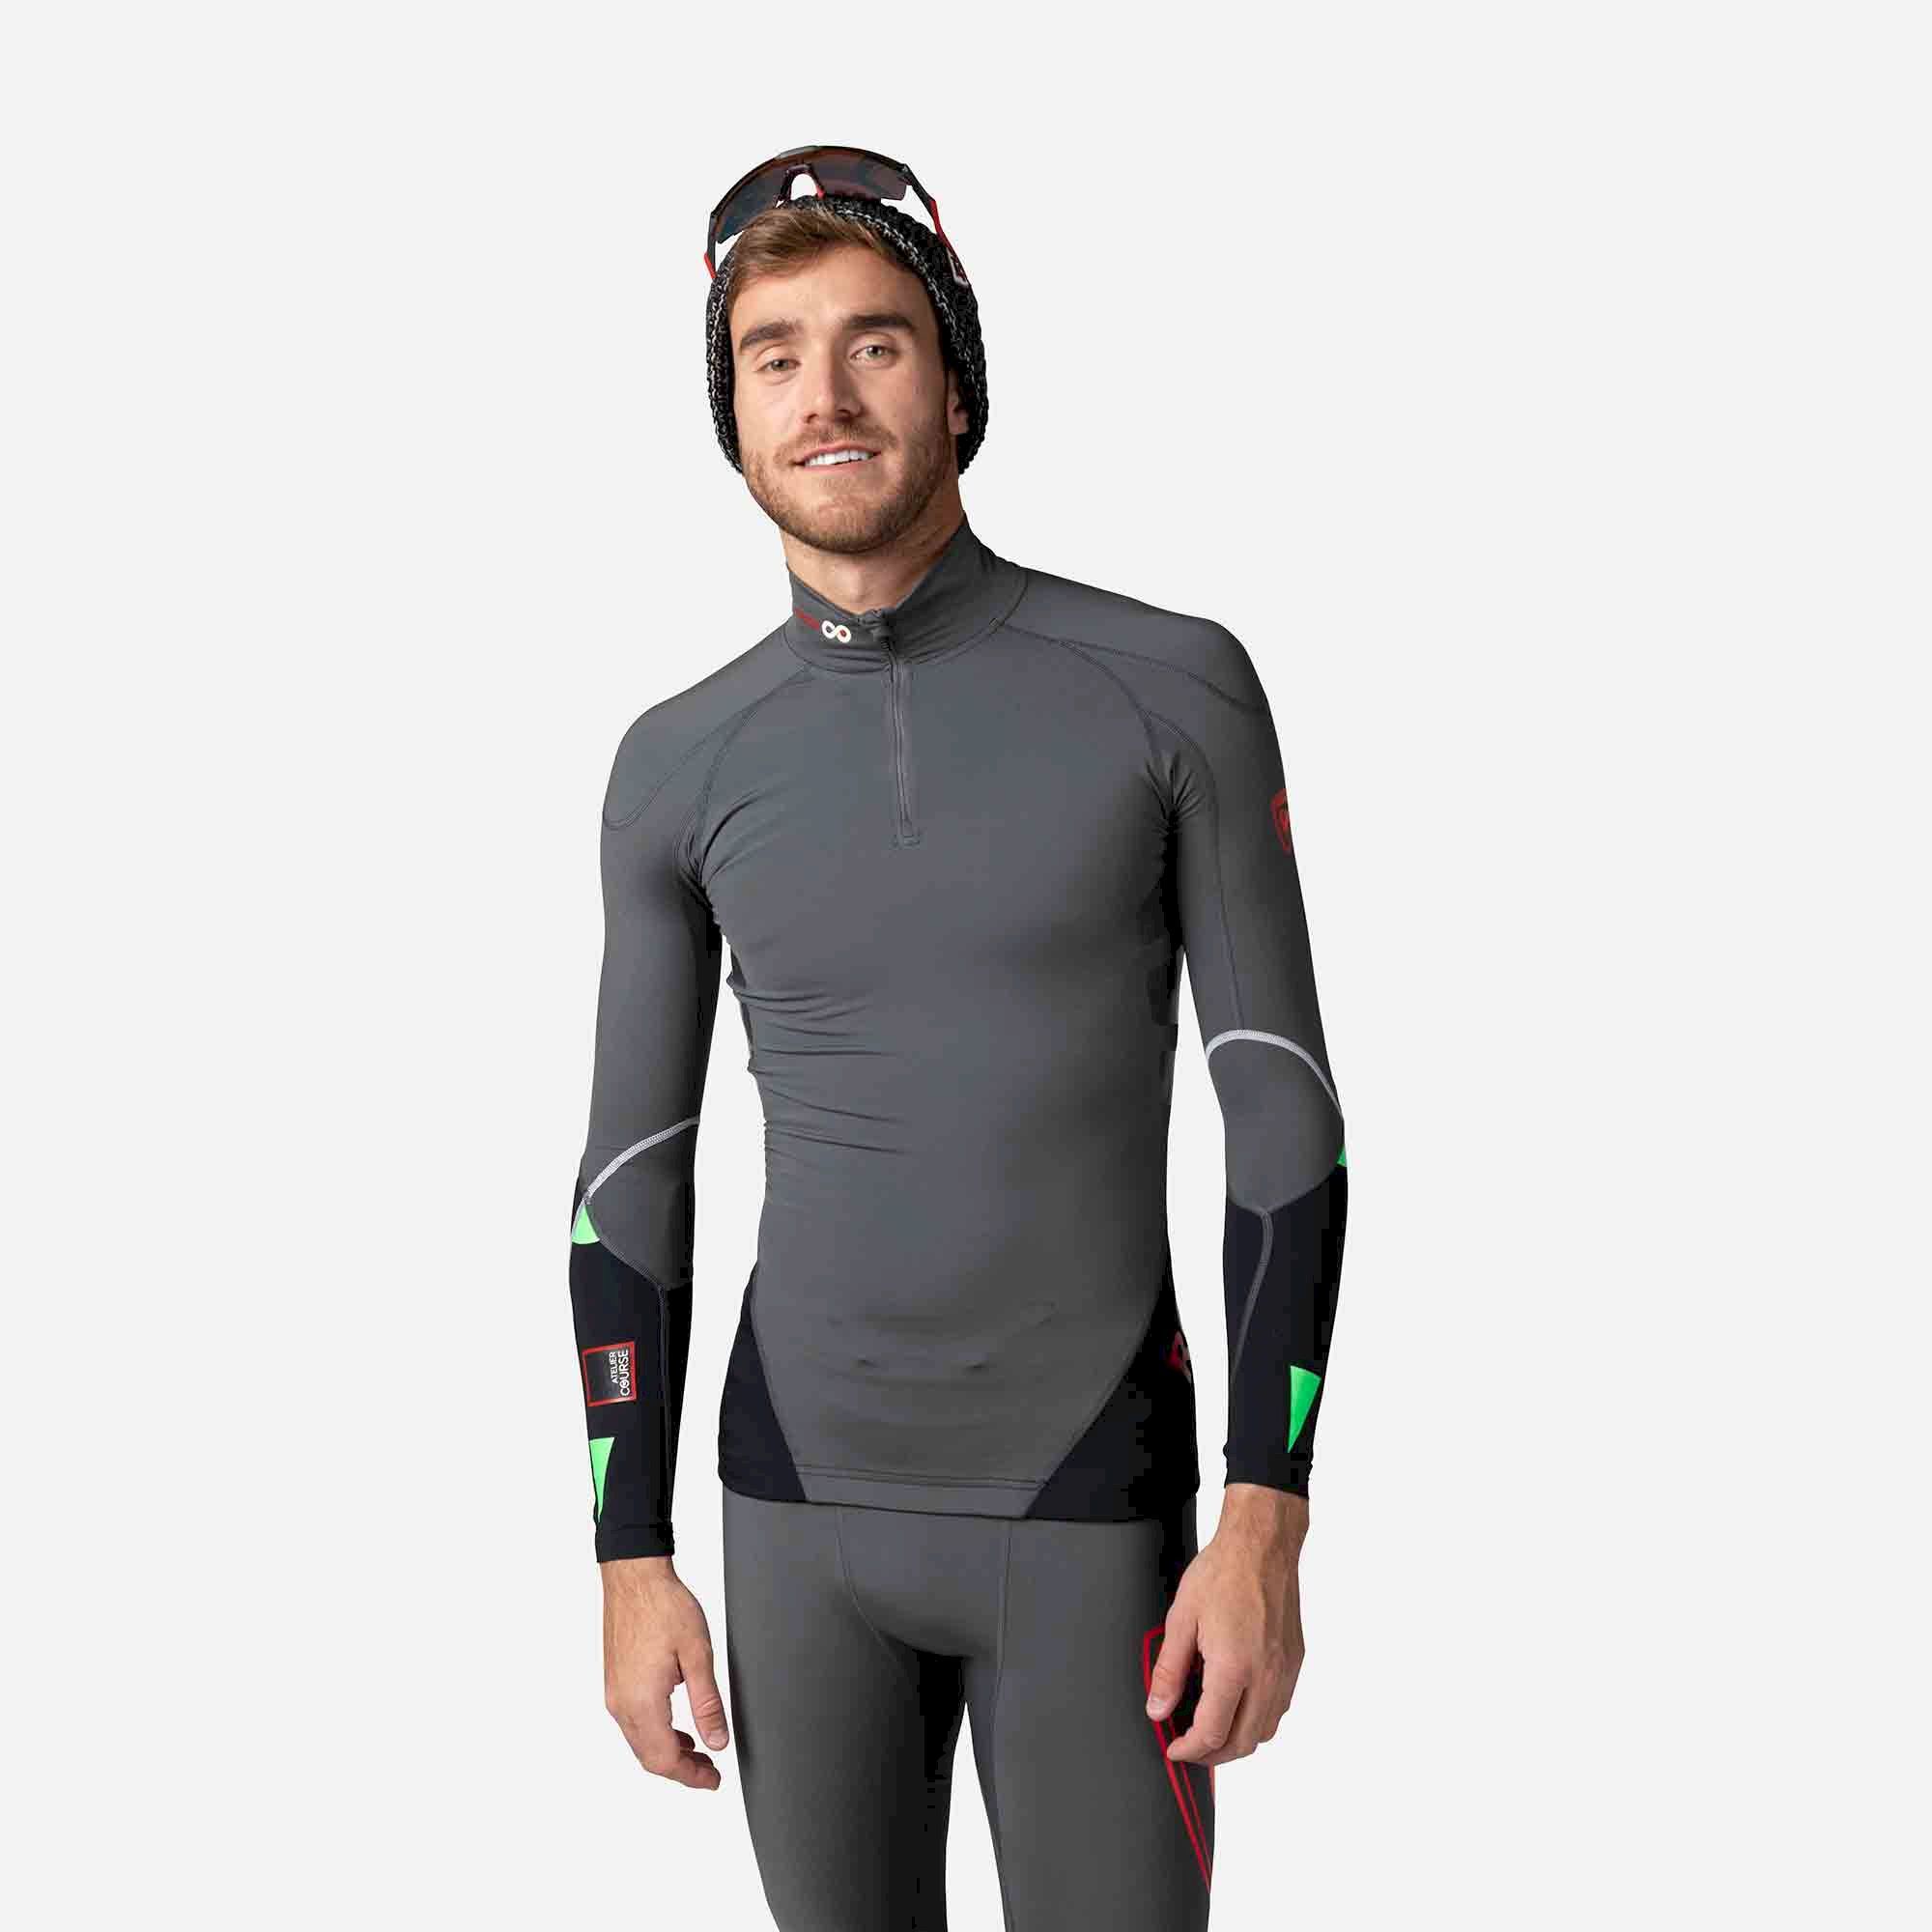 https://images.hardloop.fr/469913/rossignol-infini-compression-race-top-base-layer-mens.jpg?w=auto&h=auto&q=80